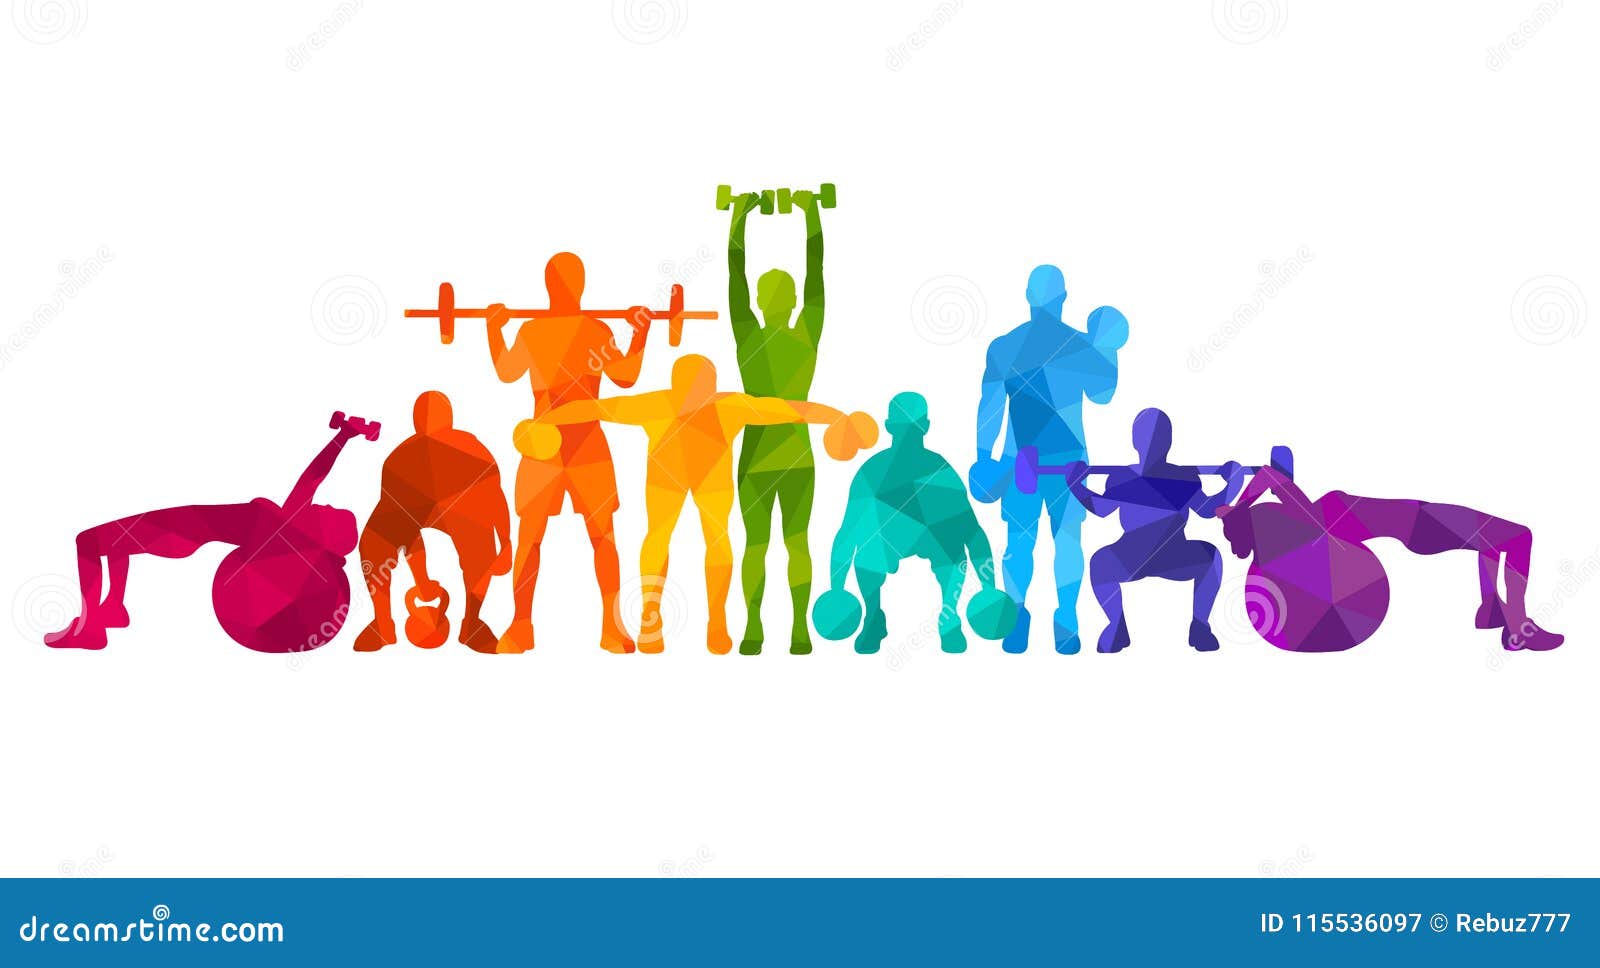 Fitness Images Clip Art